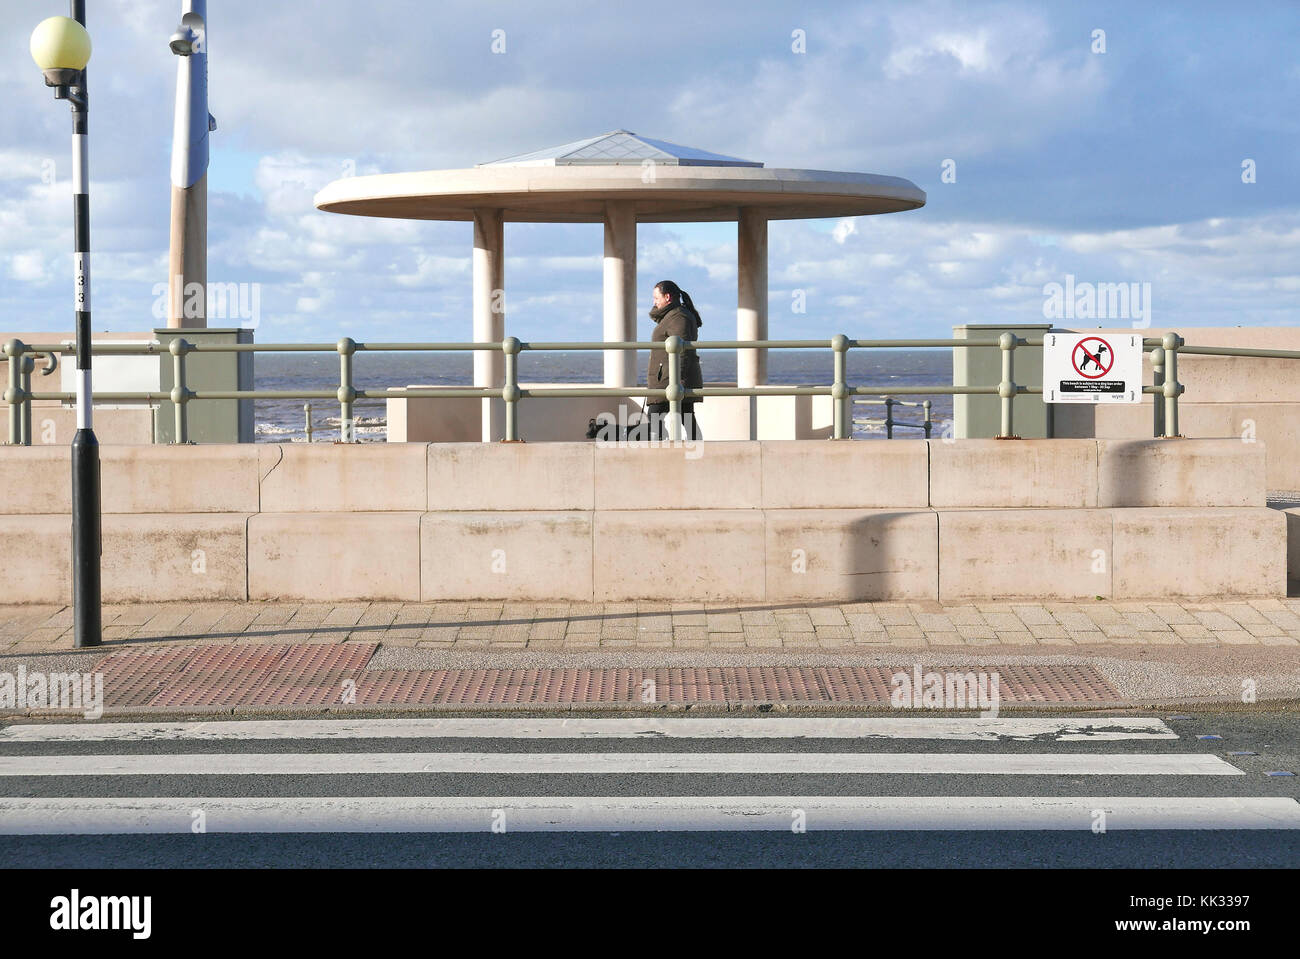 Women walking dog past concrete shelter on Cleveleys seafront in front of pedestrian crossing Stock Photo